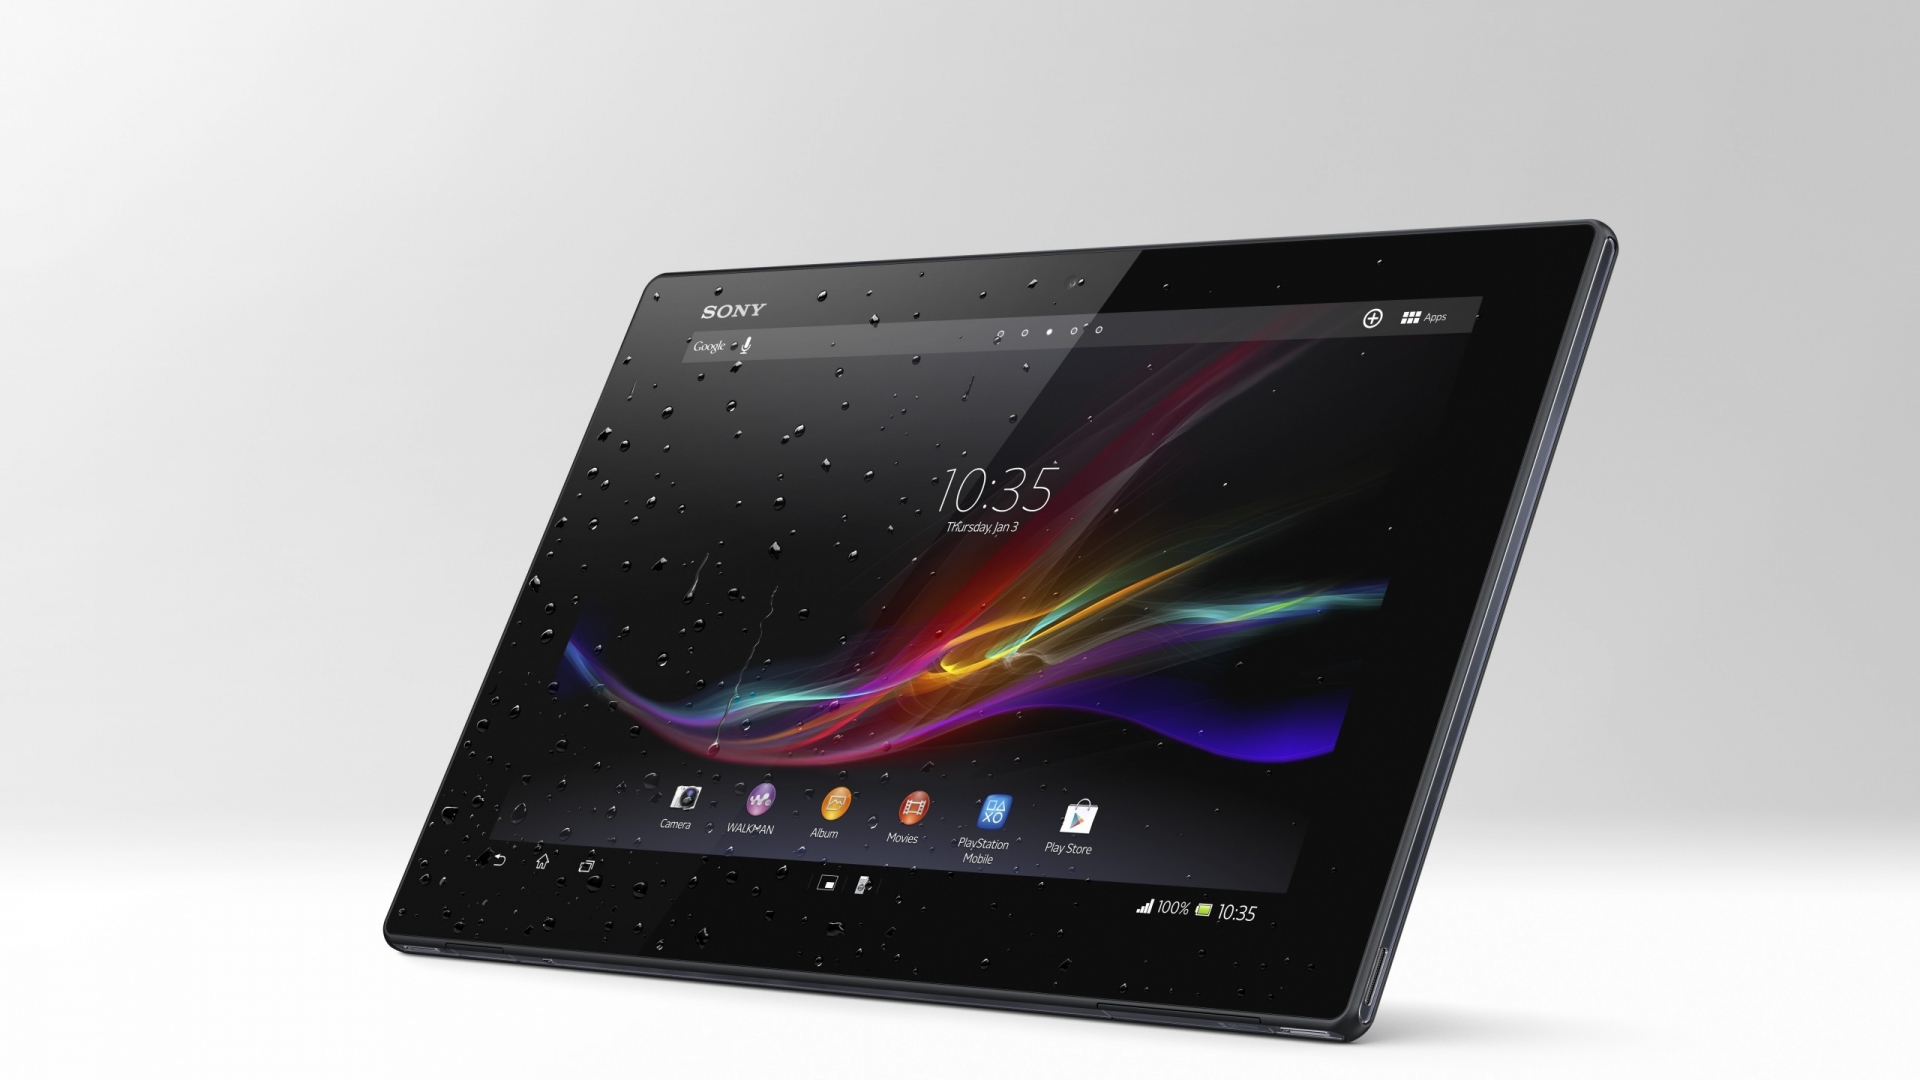 New Sony Xperia Z Tablet for 1920 x 1080 HDTV 1080p resolution